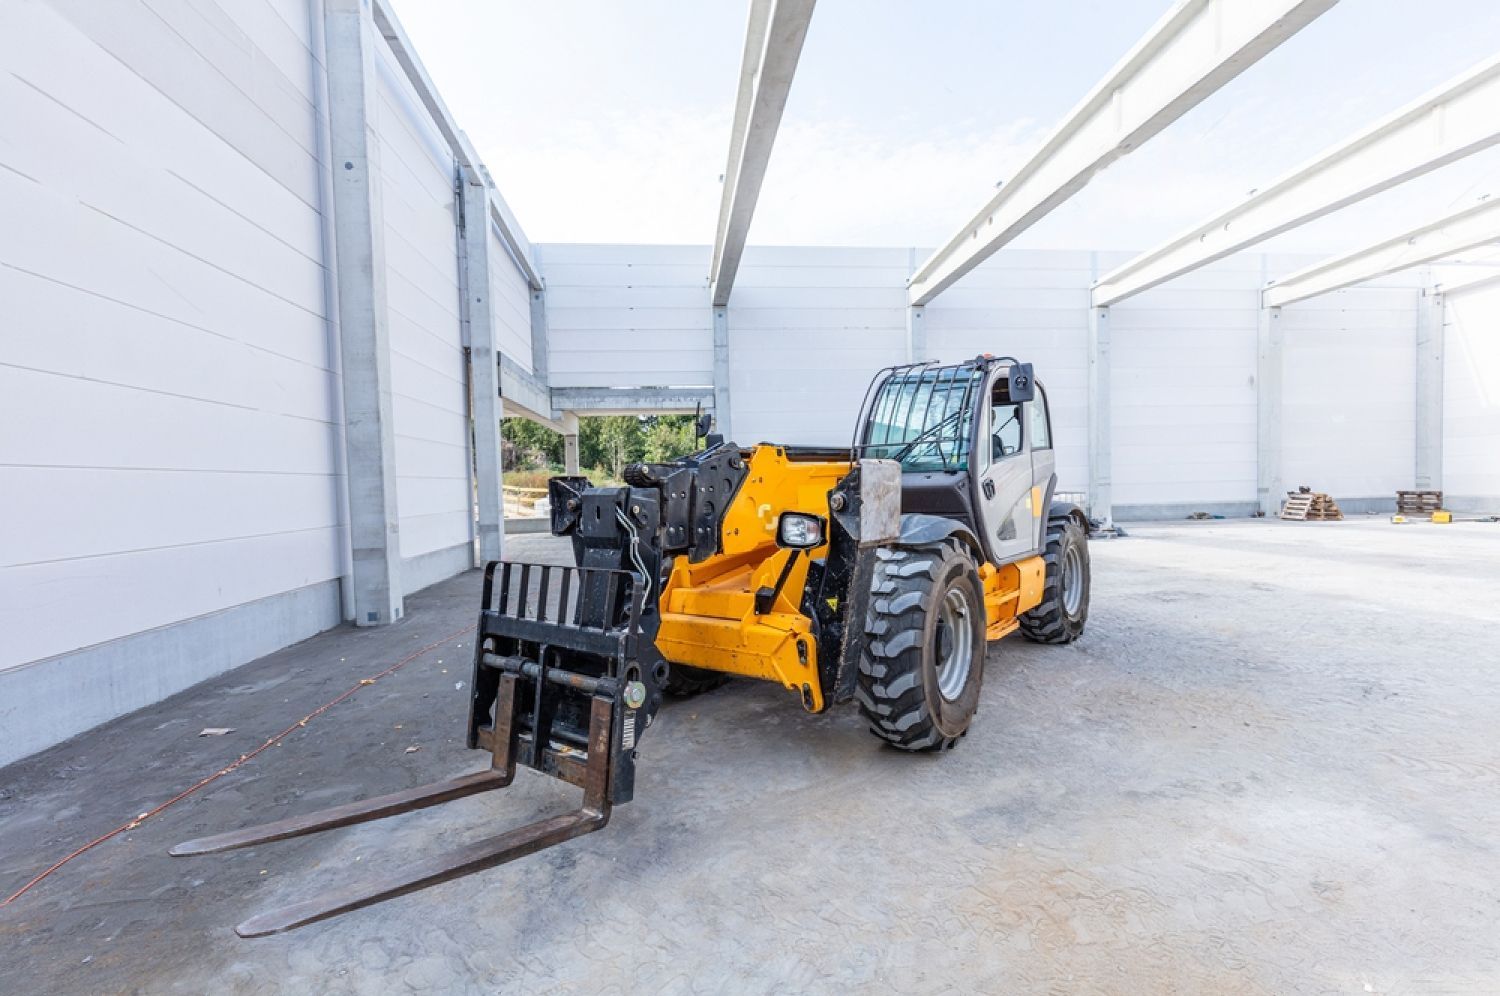 Telehandler dry hire: frequently asked questions